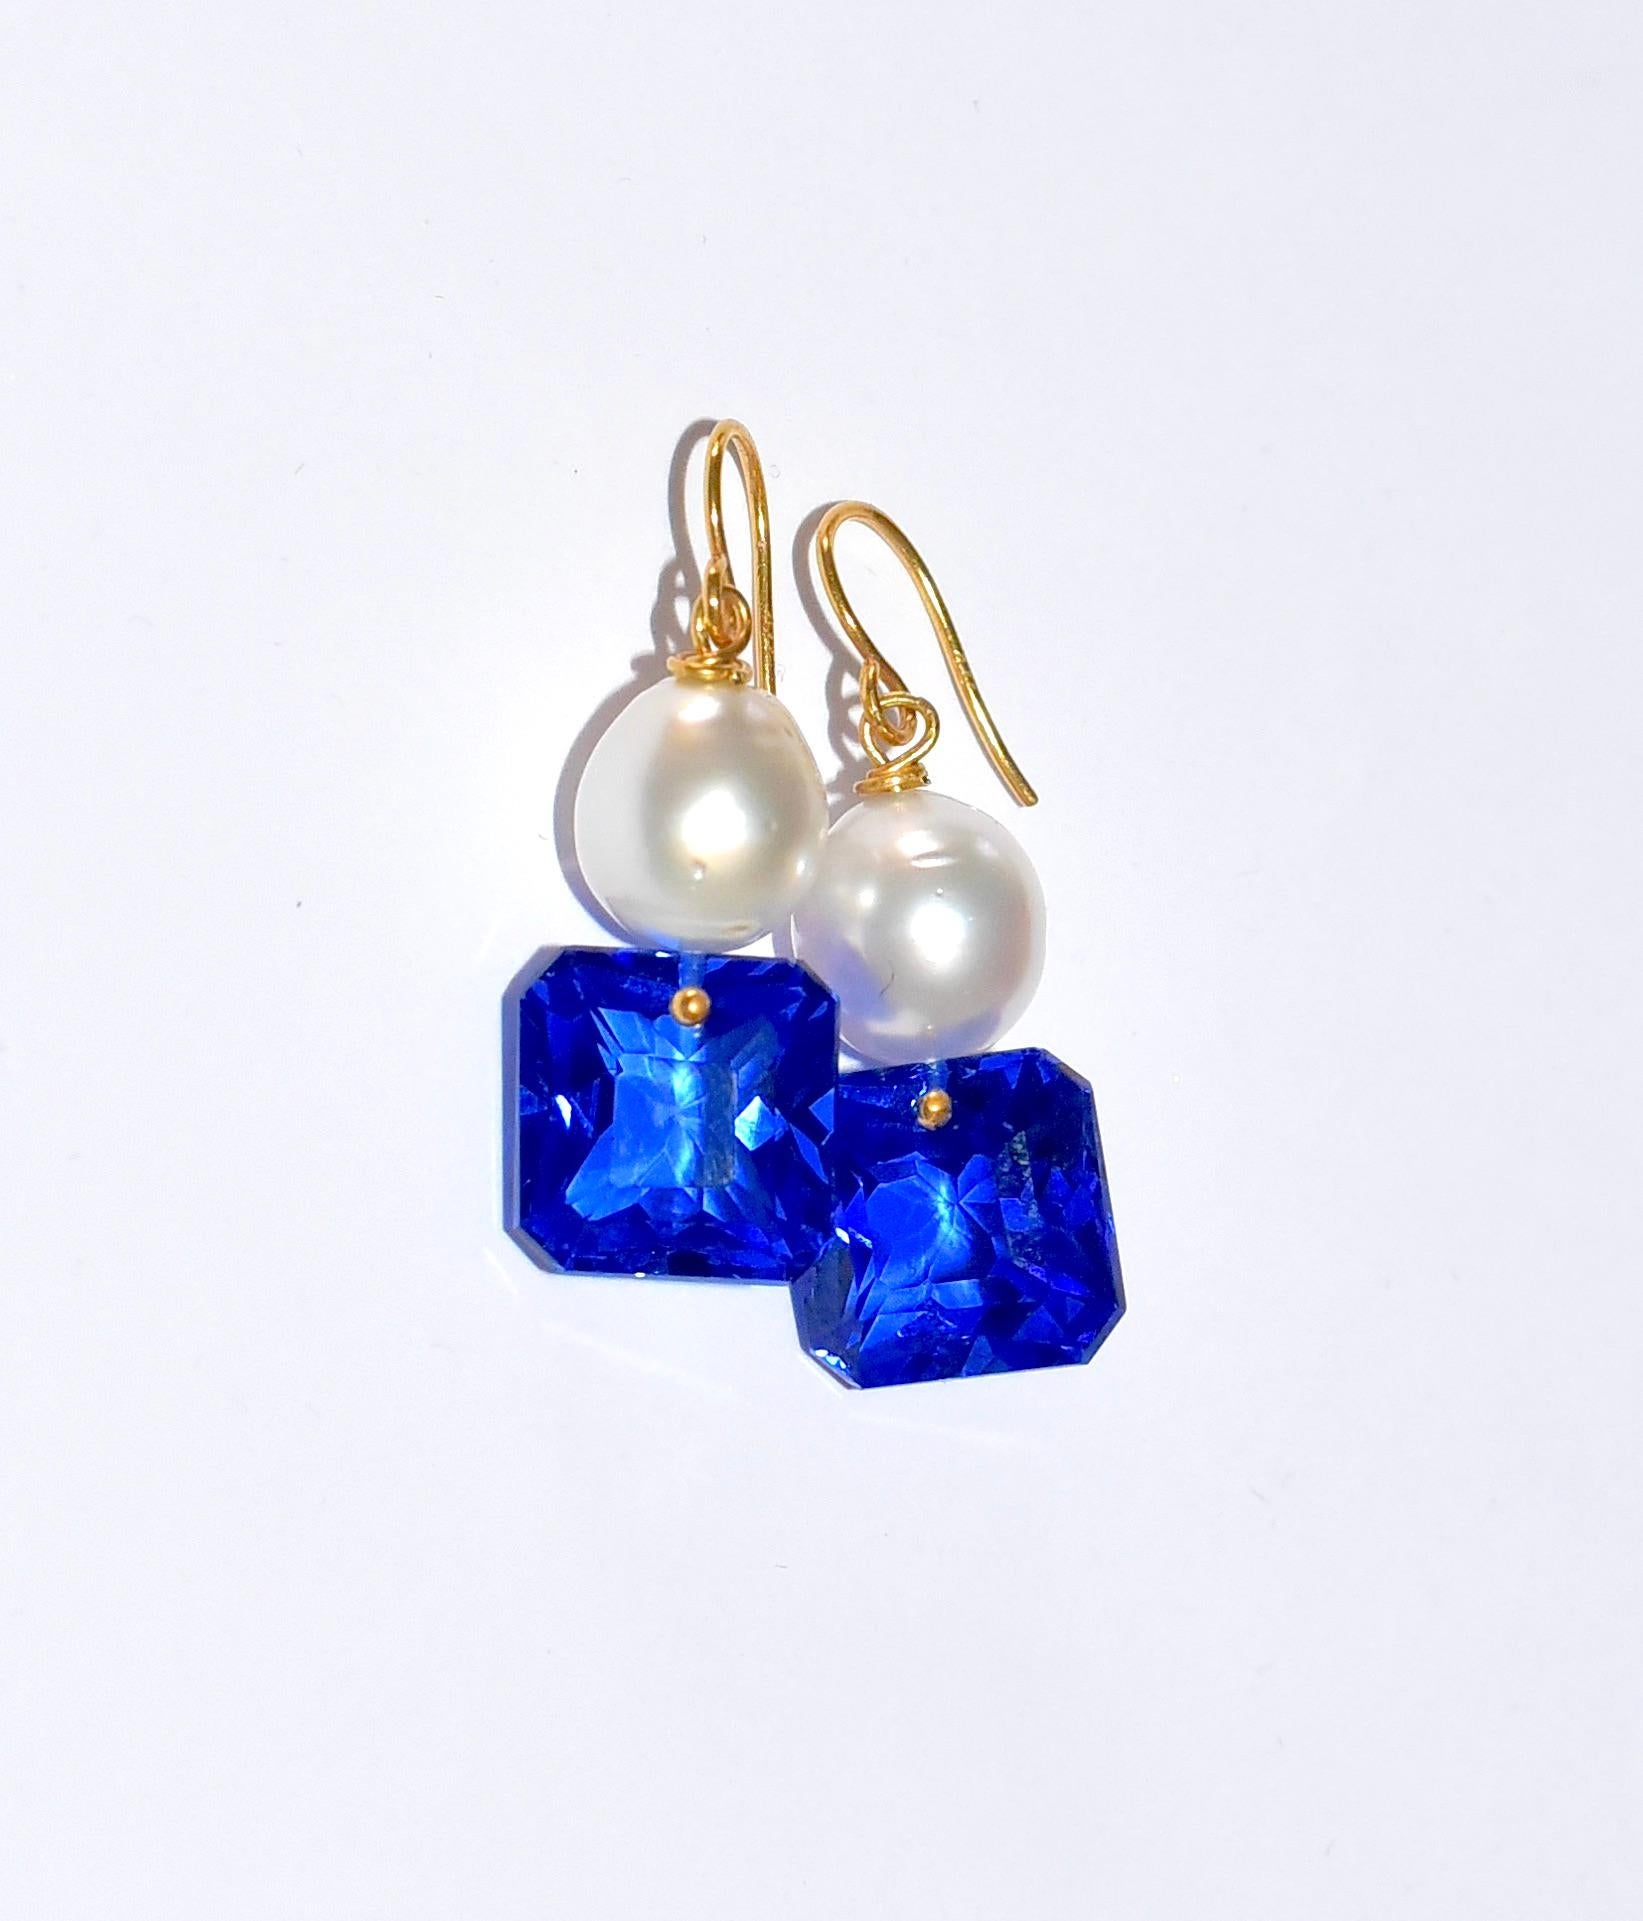 Modern South Sea Pearl, Blue Sapphire Earrings in 14K Solid Yellow Gold